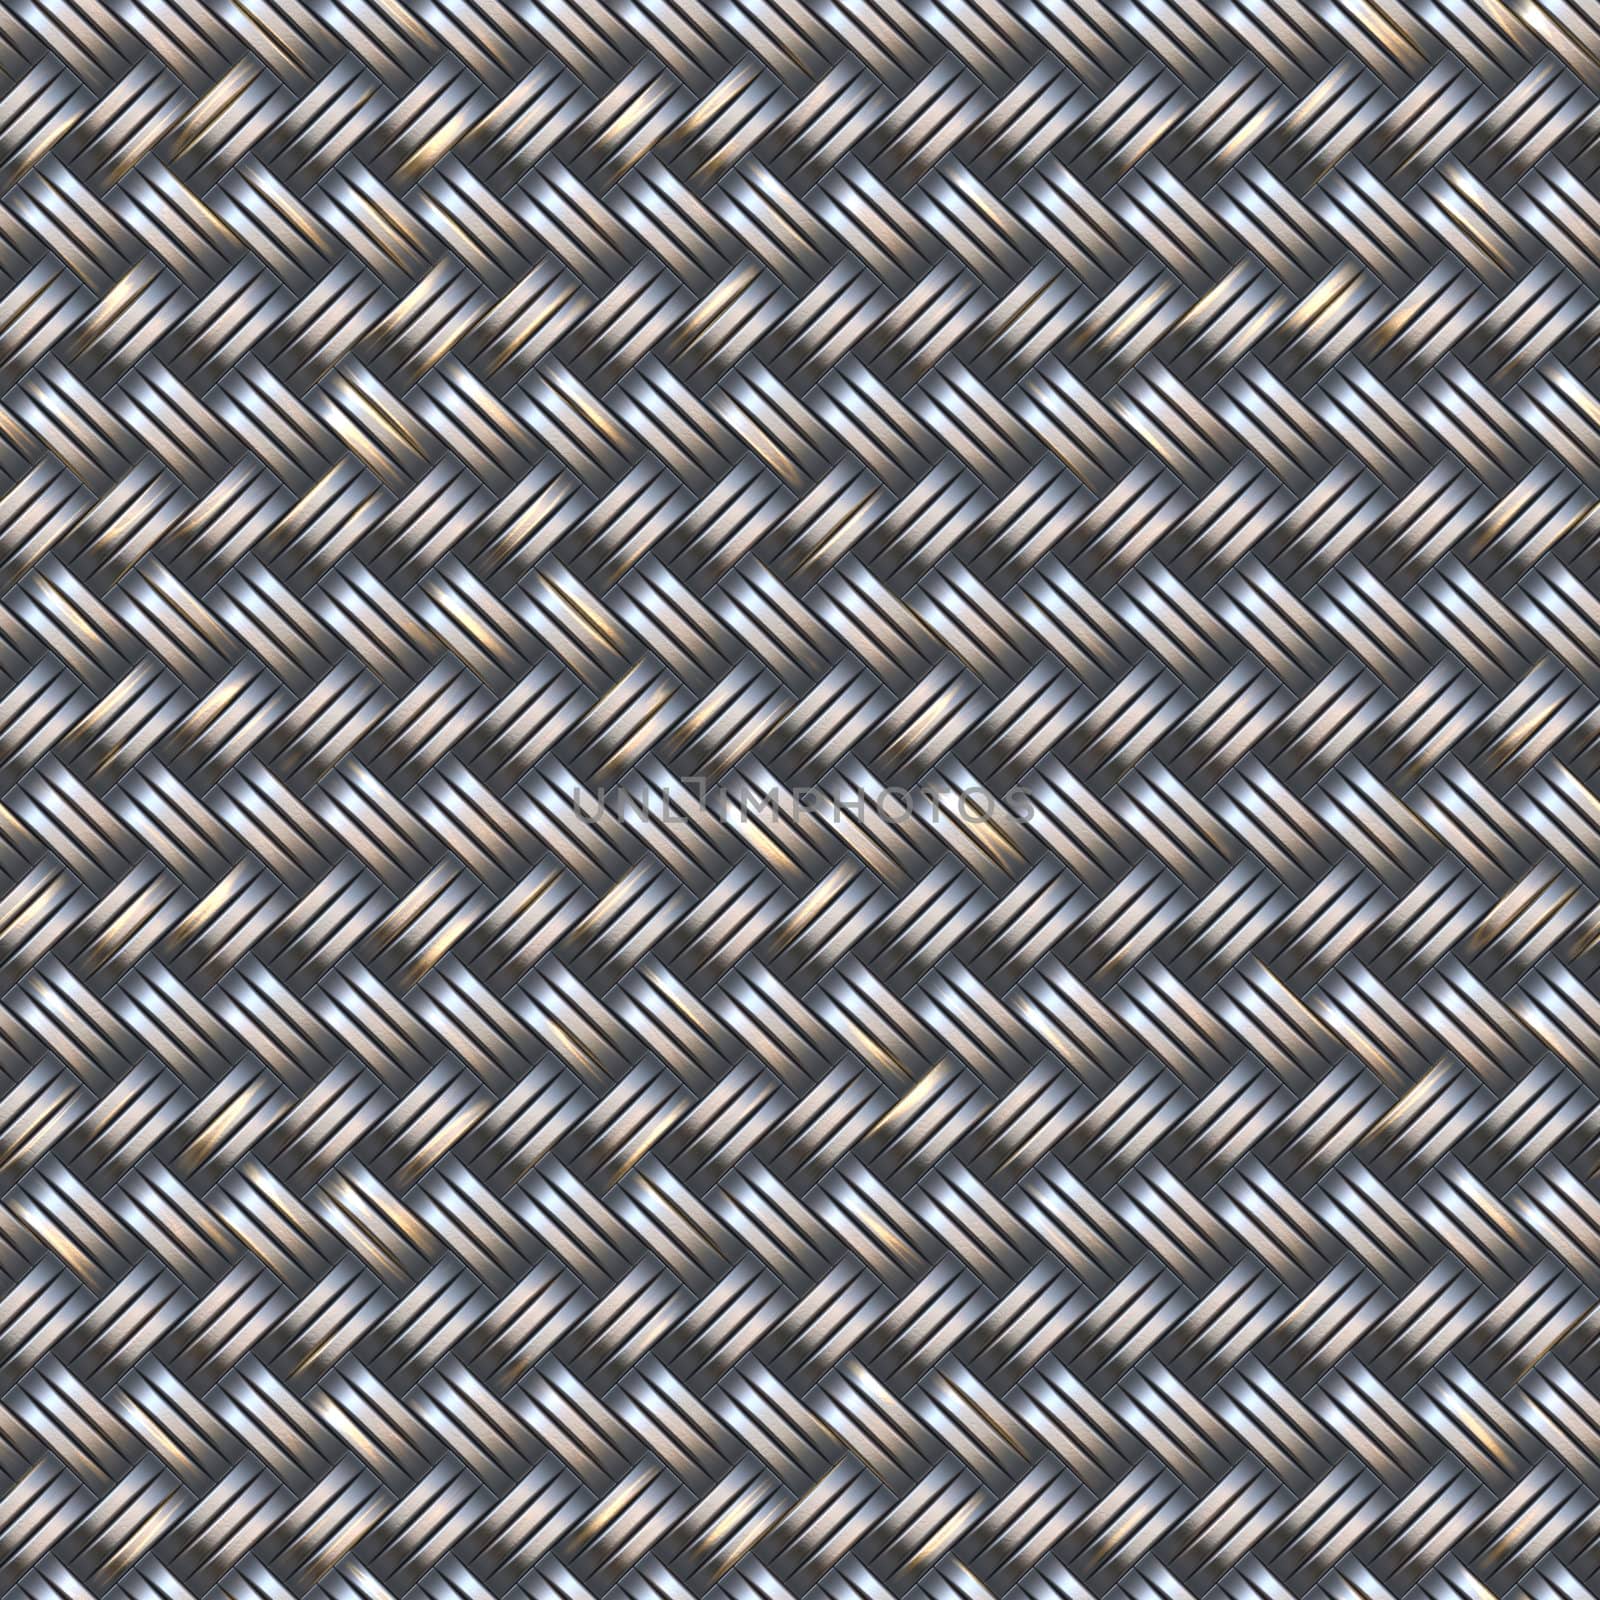 woven metal by clearviewstock